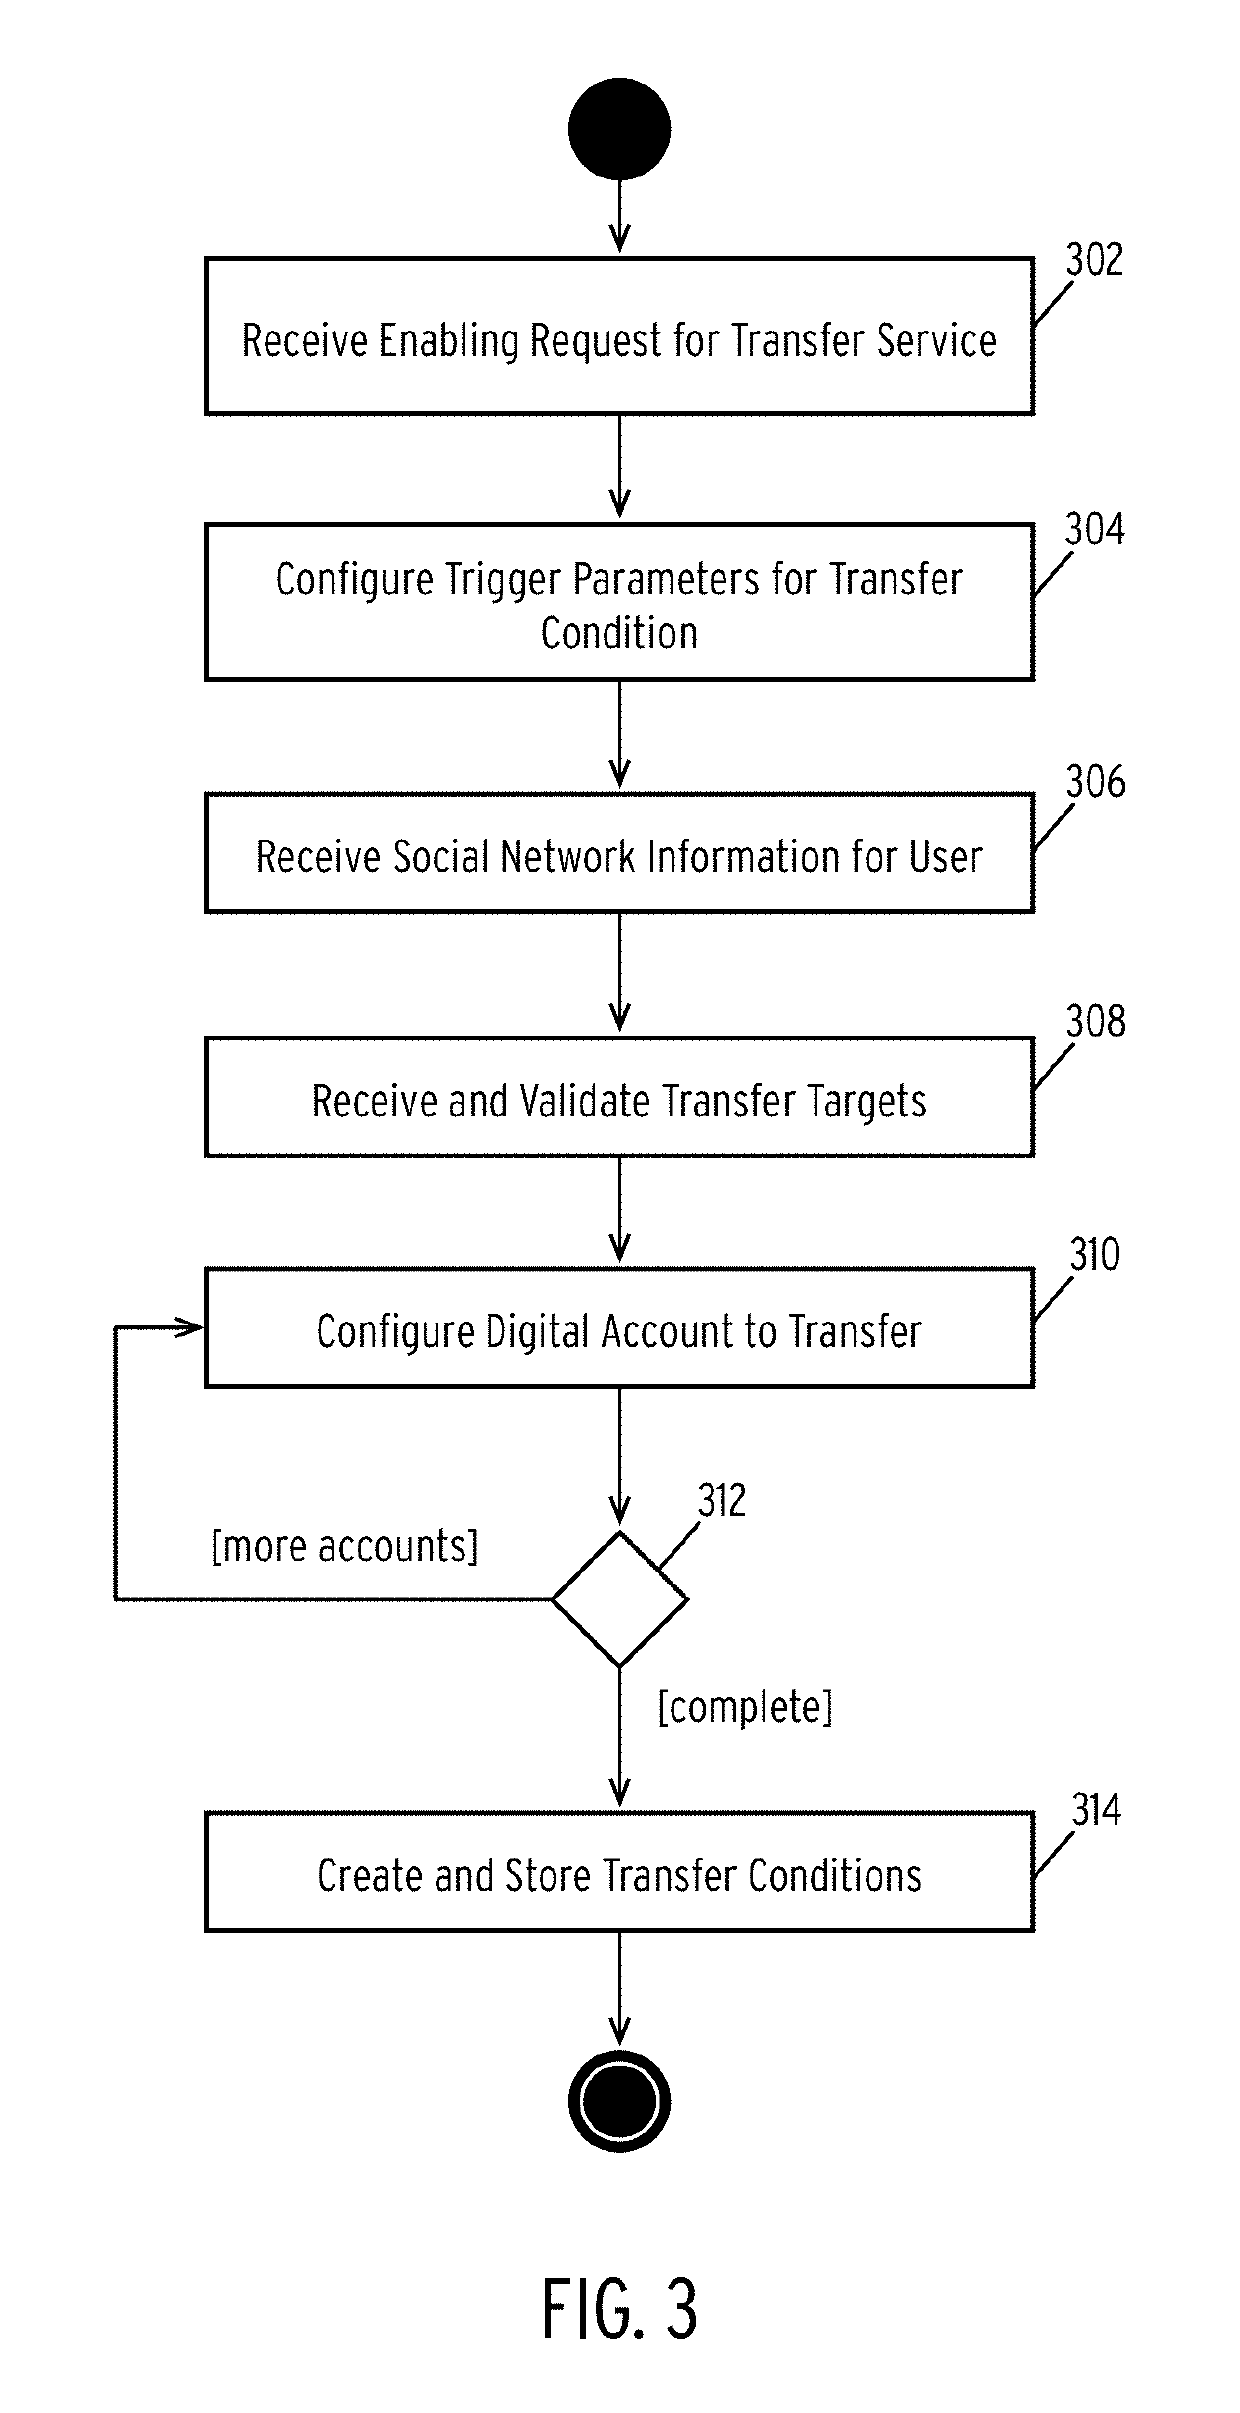 Automated network account transfers based on determined inactivity